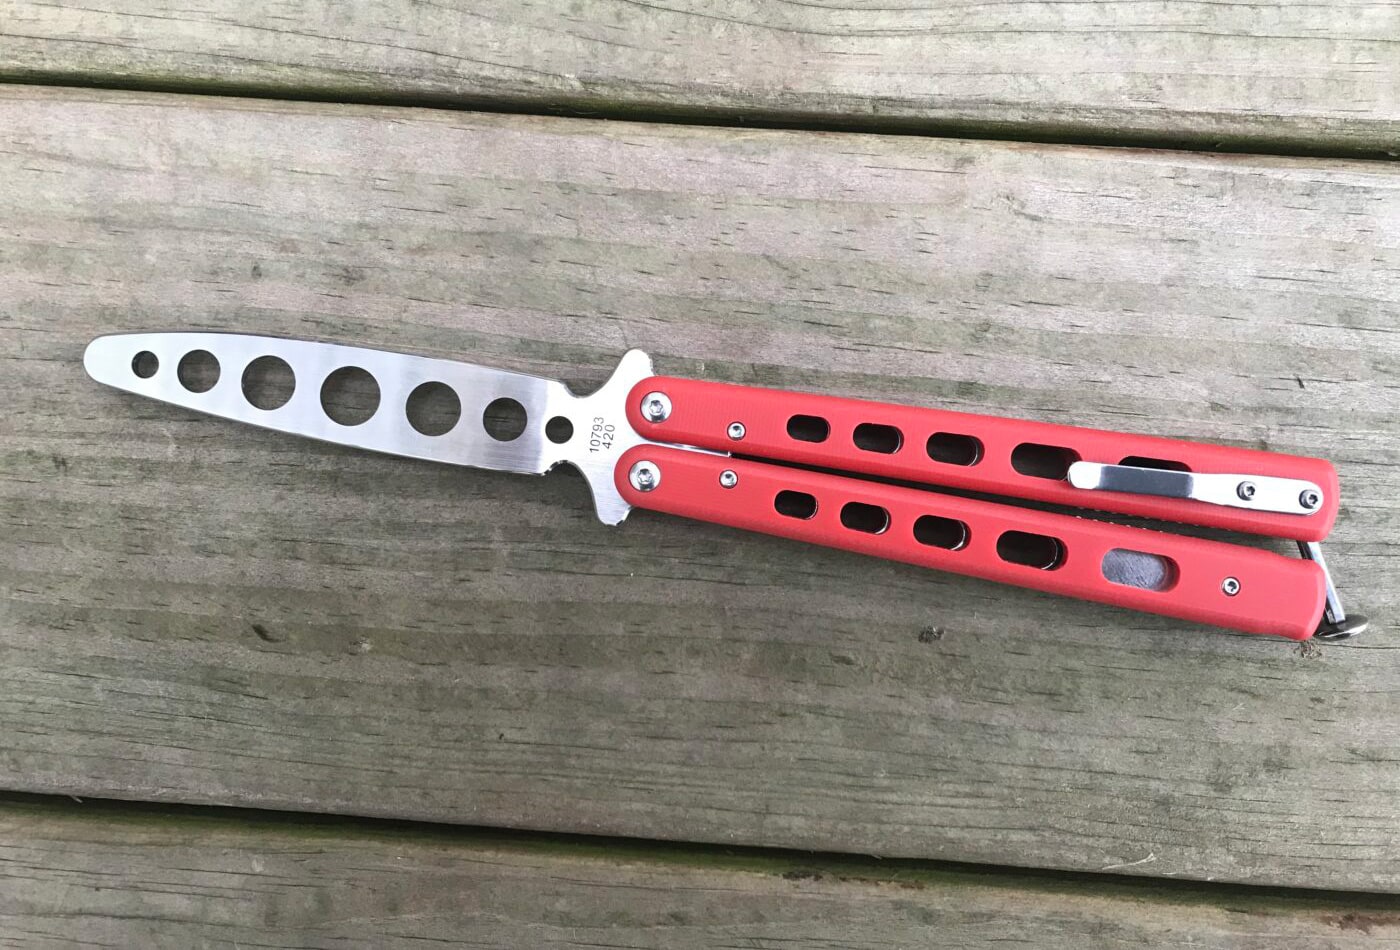 Best Butterfly Trainers - Knife Life